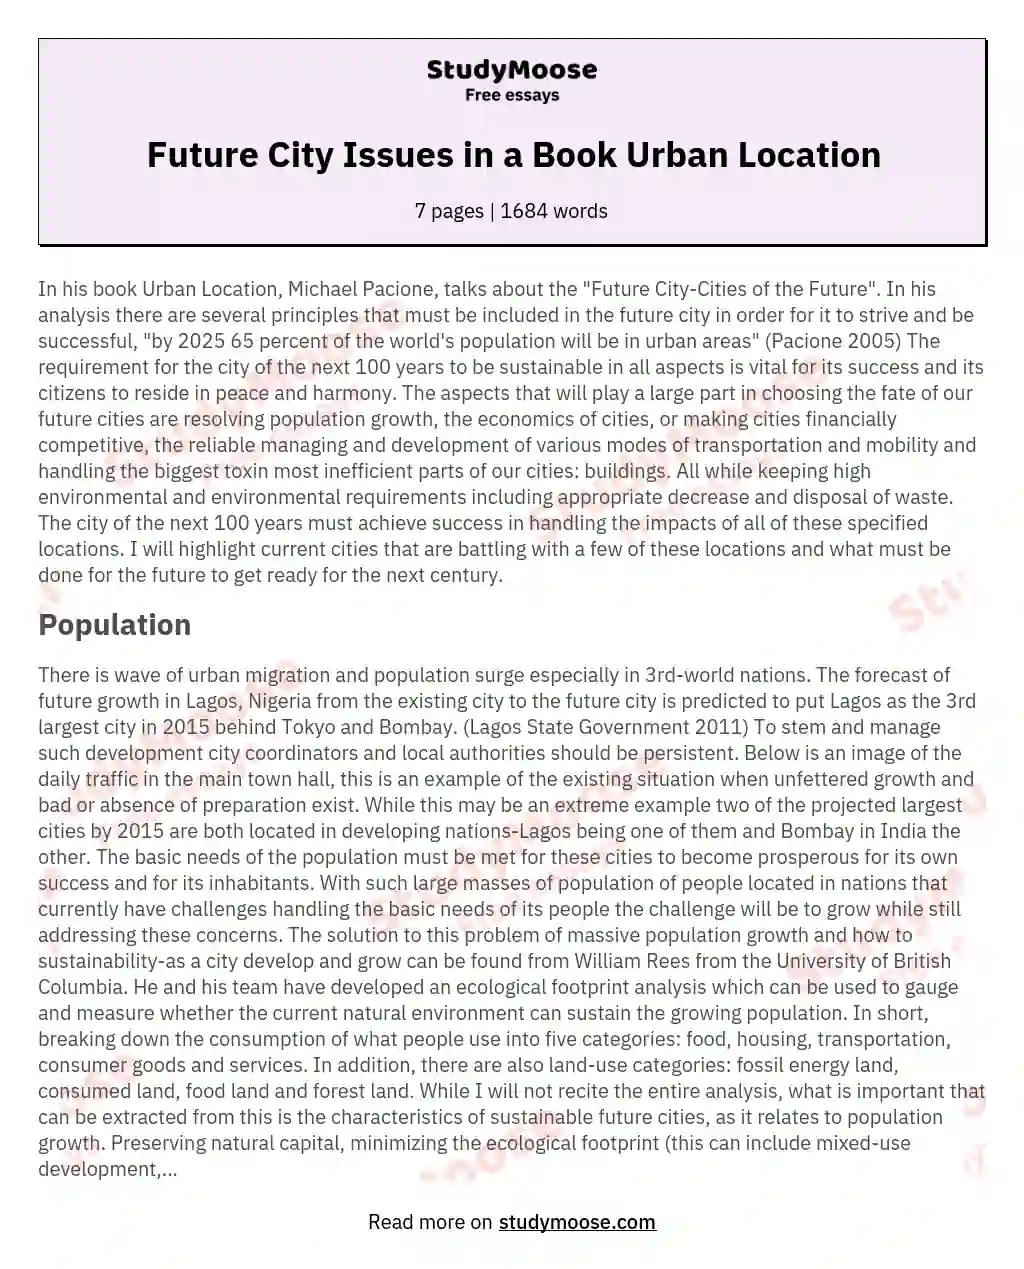 Future City Issues in a Book Urban Location essay